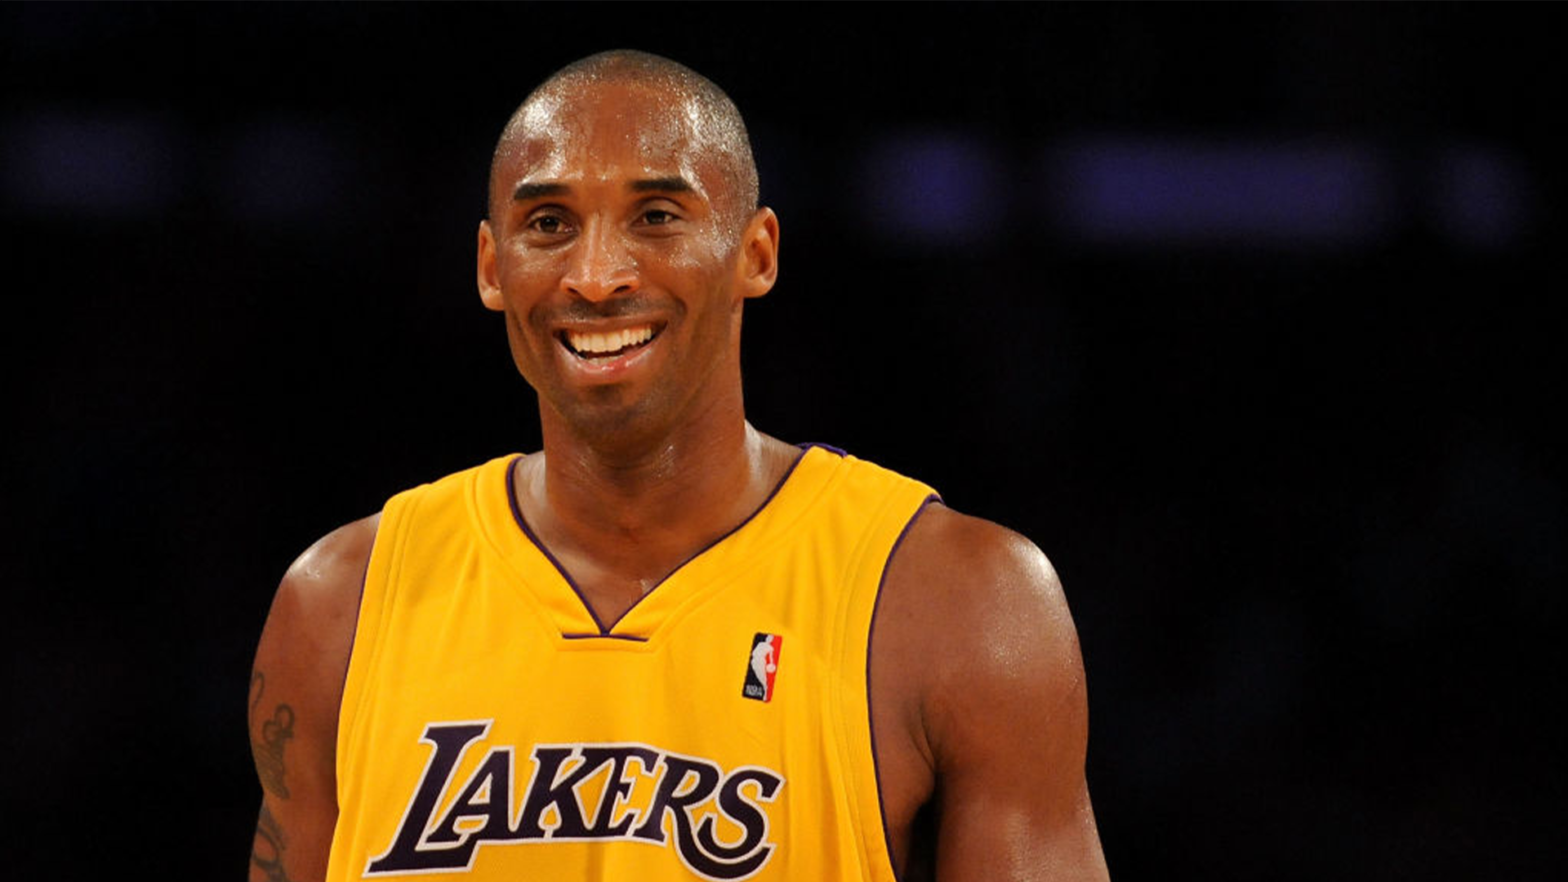 Autographed Card Of A Teenage Kobe Bryant Projected To Sell For Over $1M At Auction